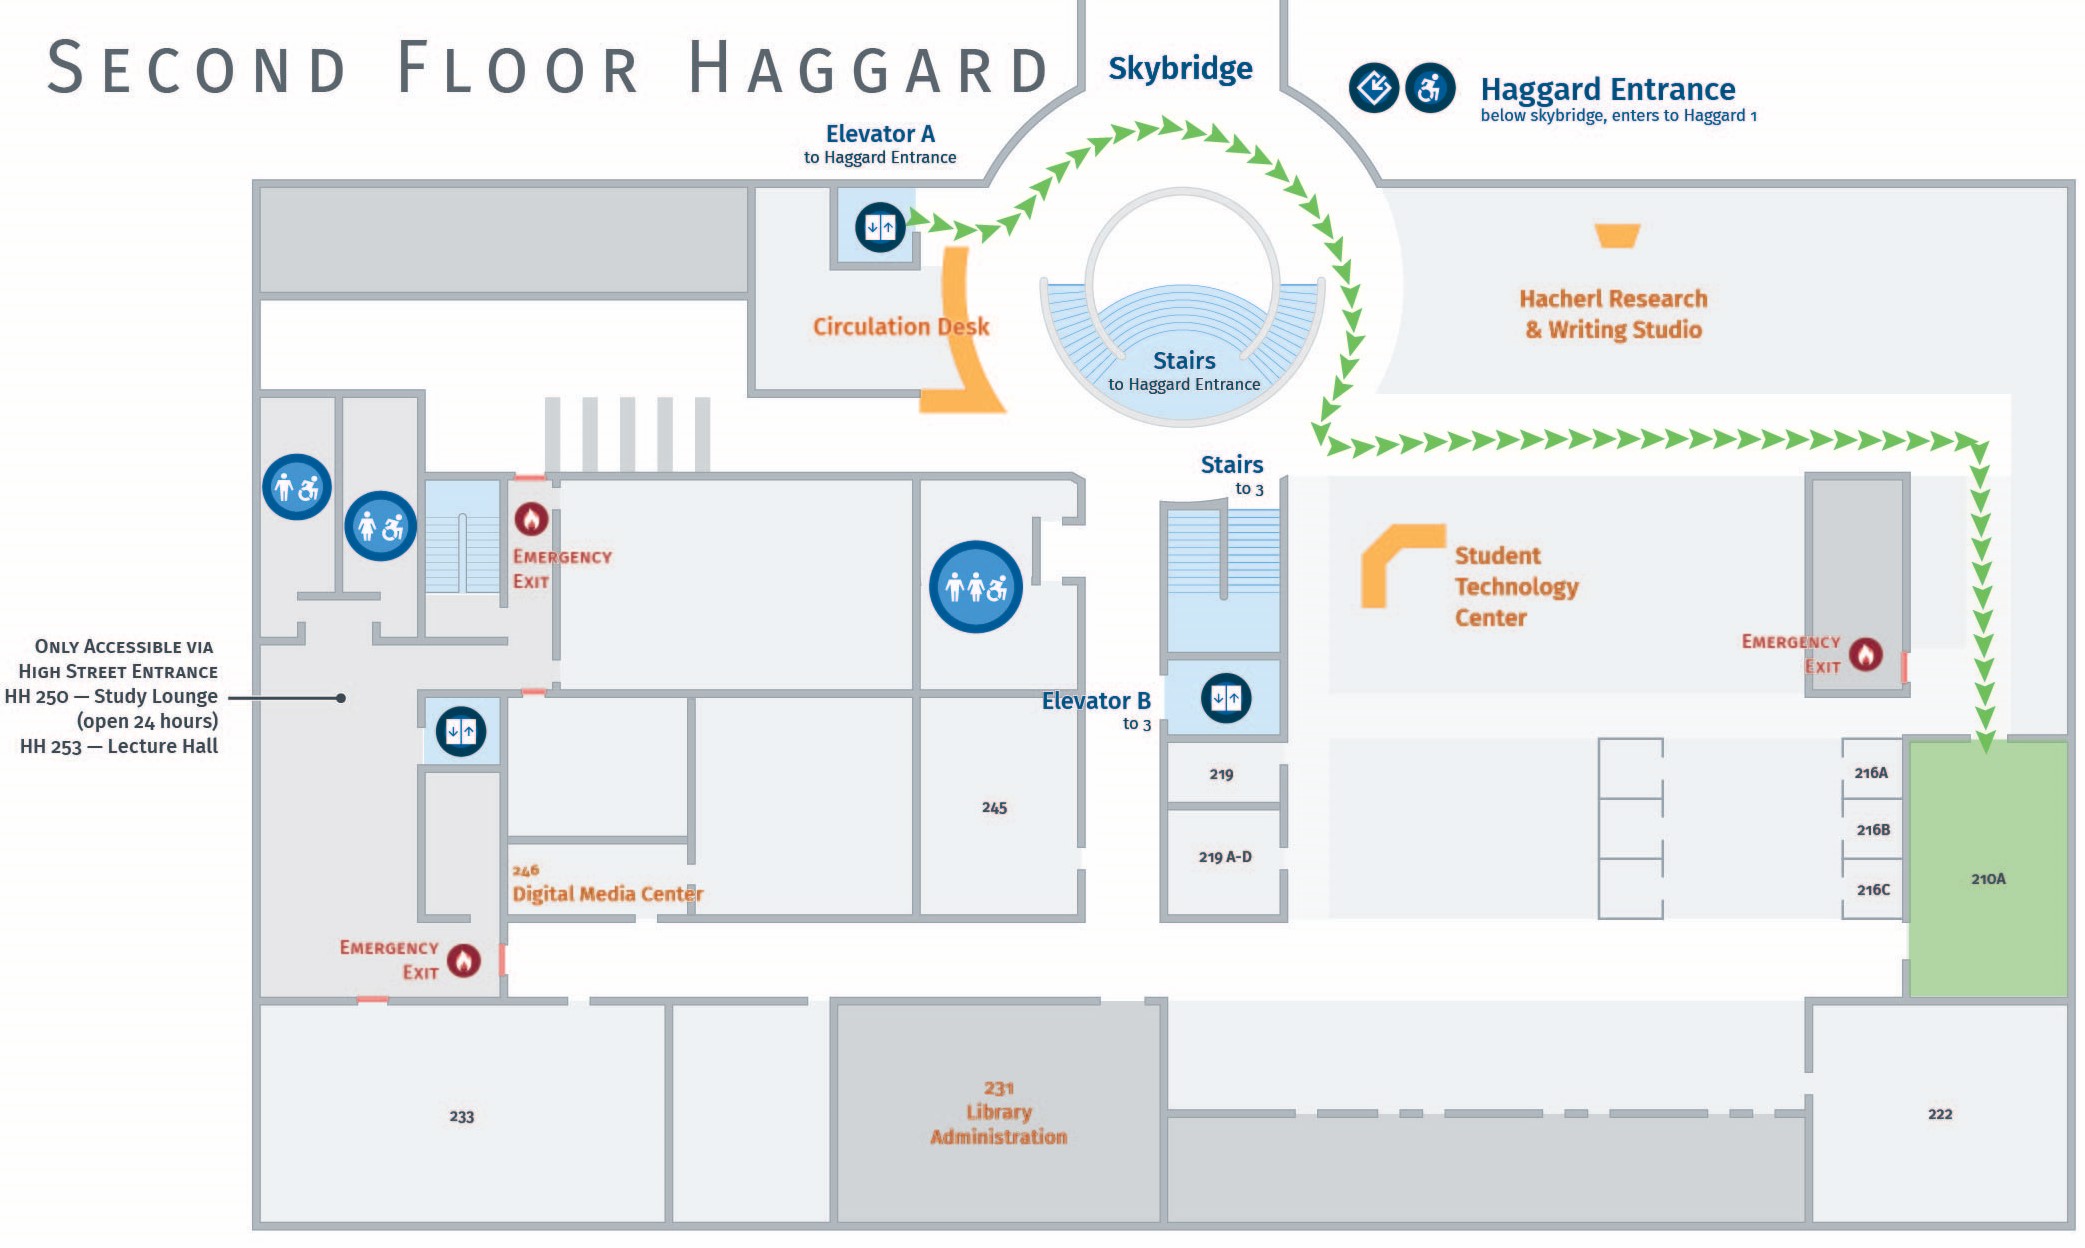 Floor plan, second floor of Wilson and Haggard with accessible path to HH 210A.